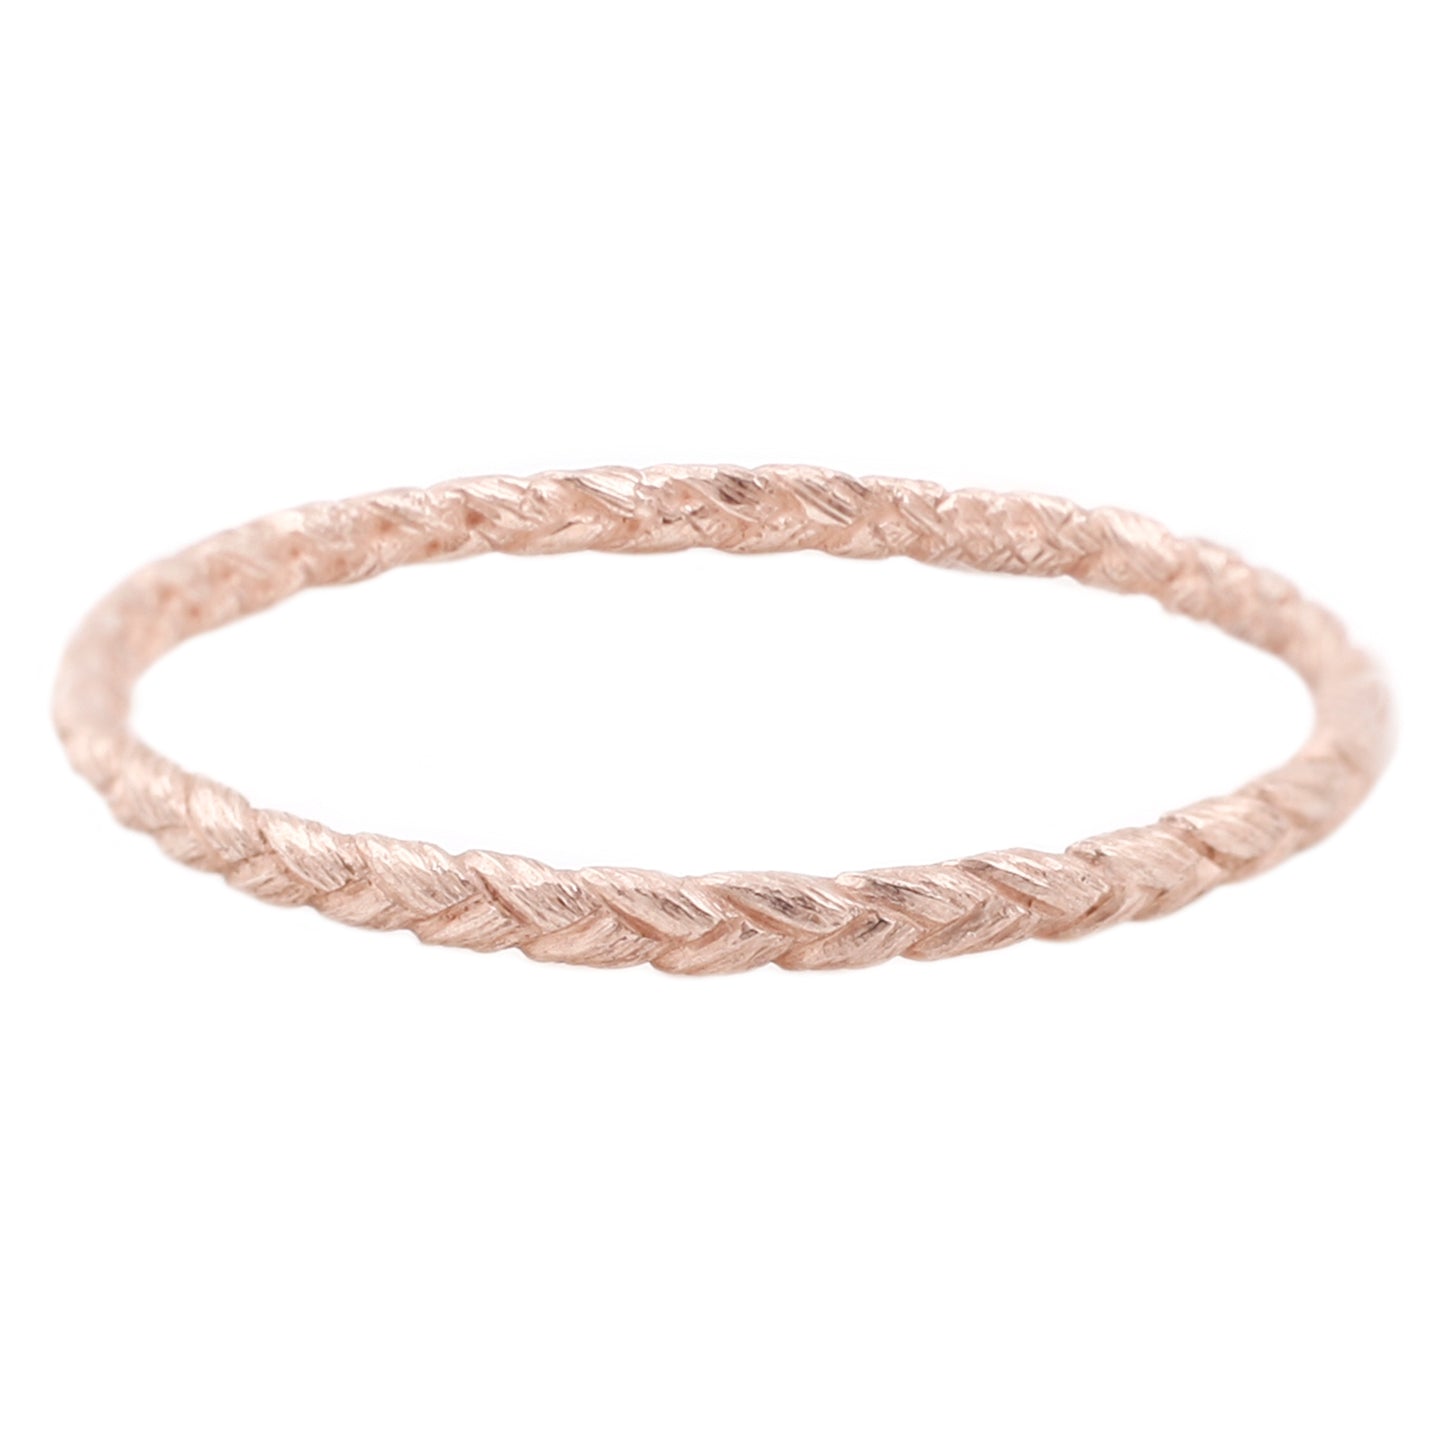 Small Rose Gold Braid Ring